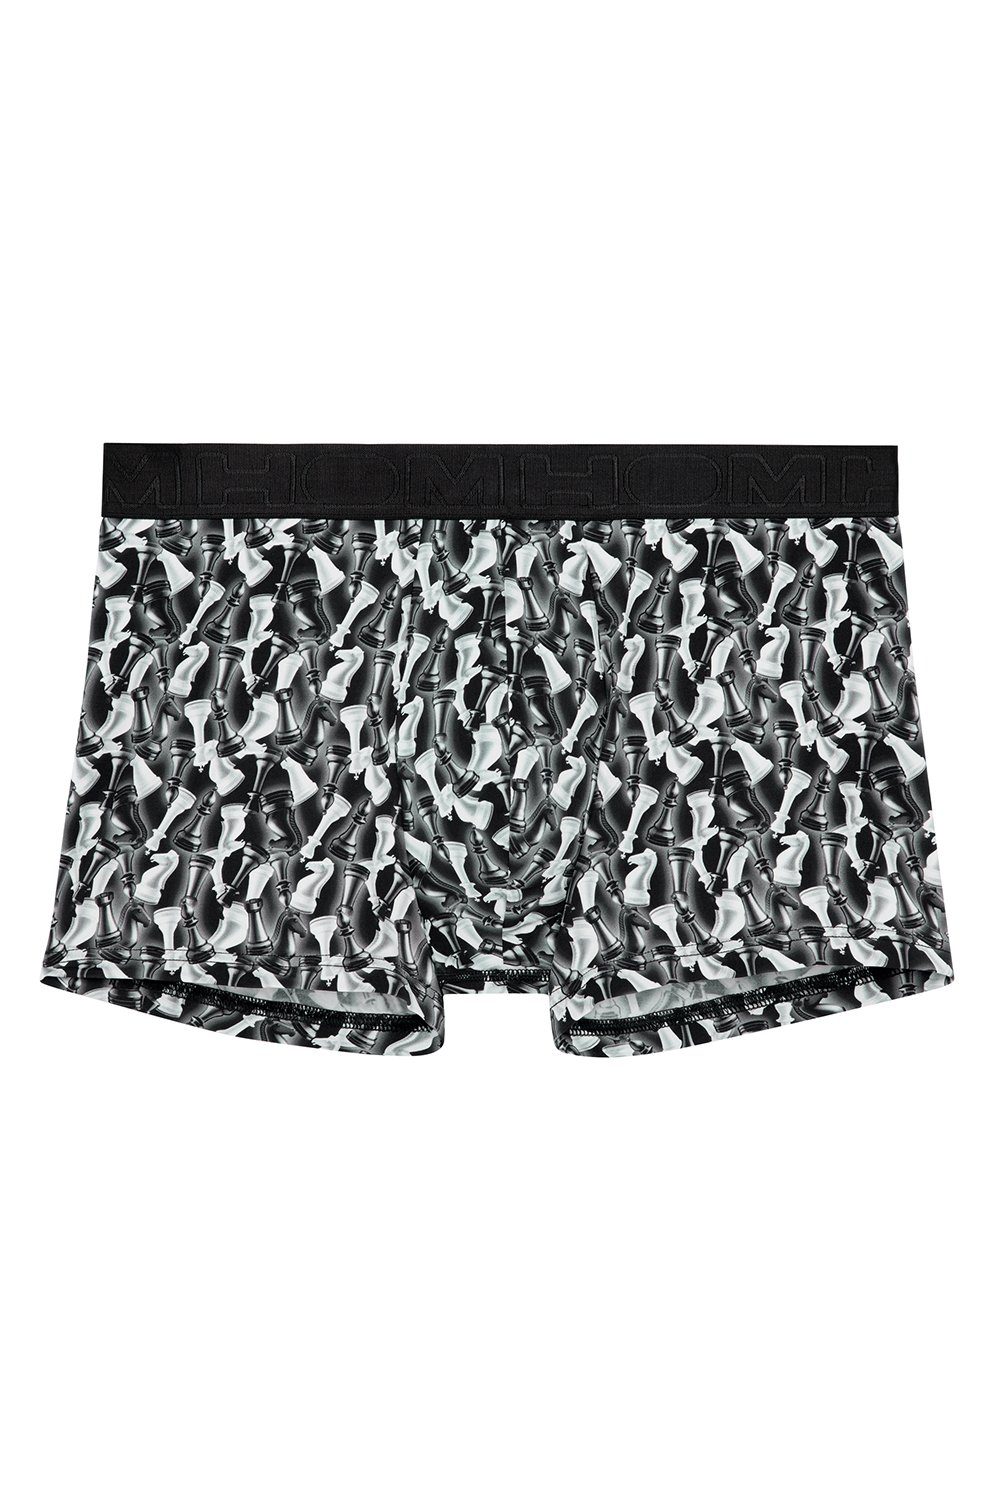 Chess Hipster Boxer Hom Briefs 402671